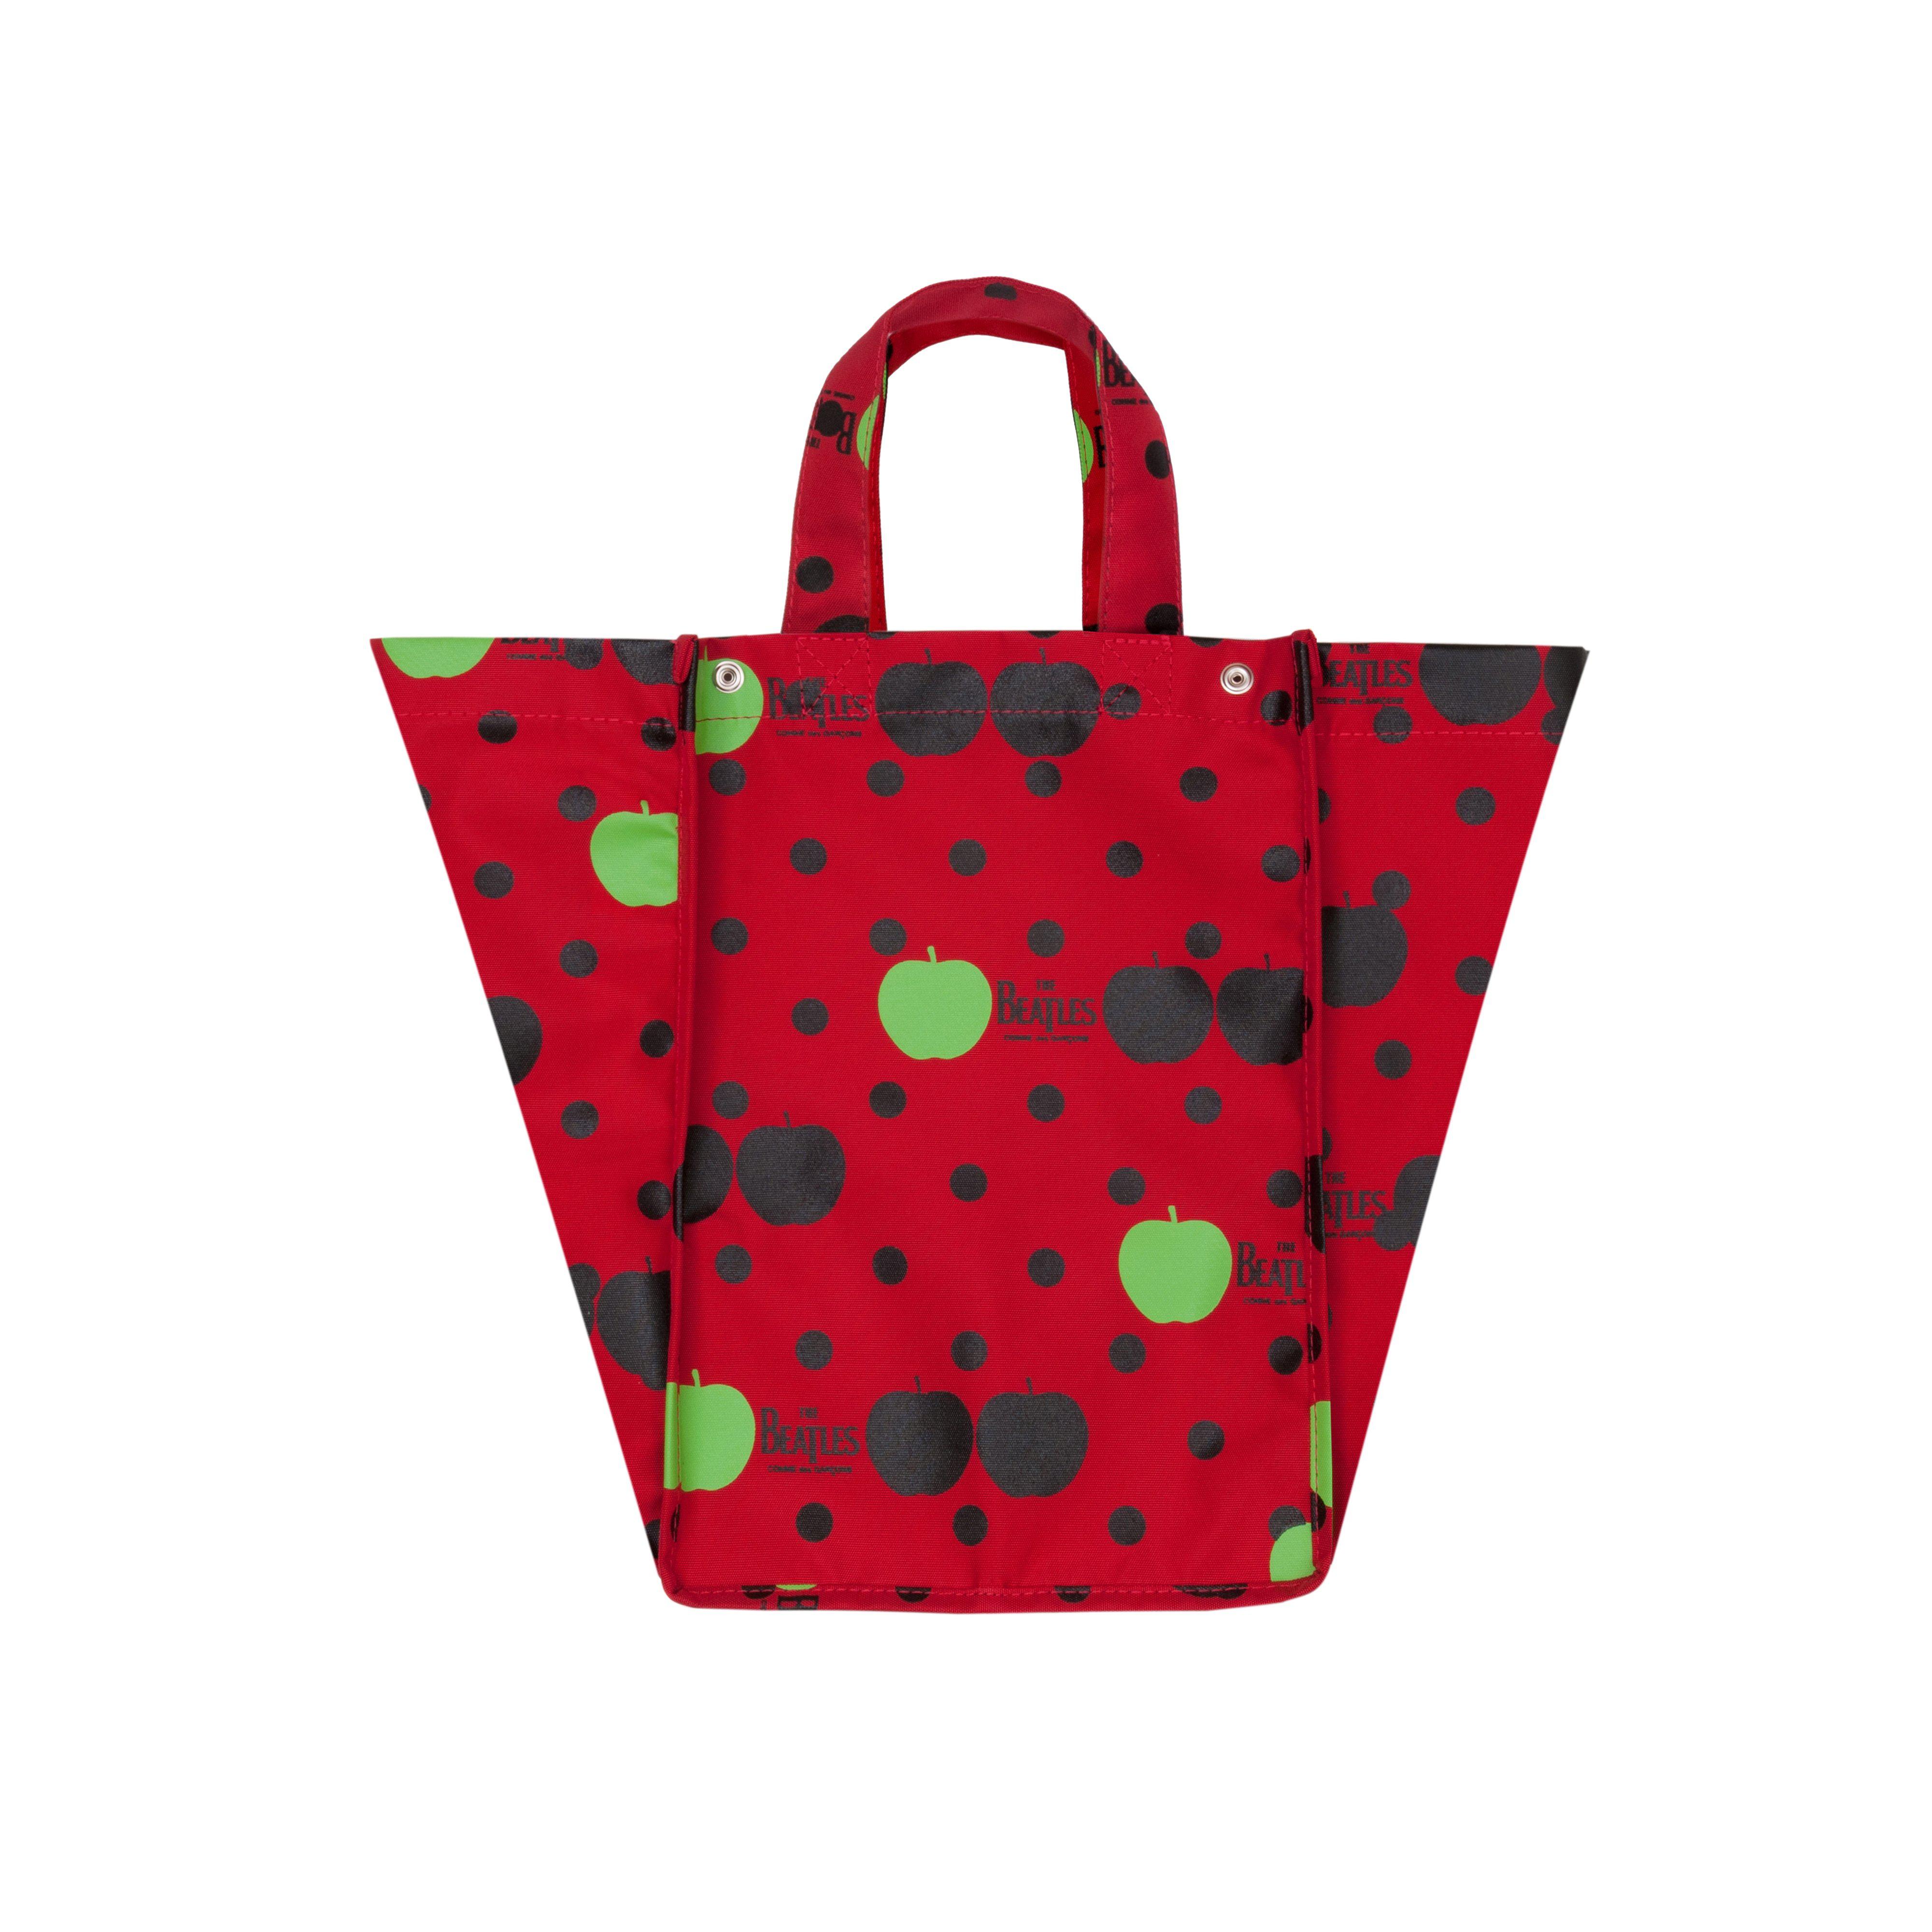 CDG x The Beatles Tote Bag (Red) by COMME DES GARCONS X BEATLES